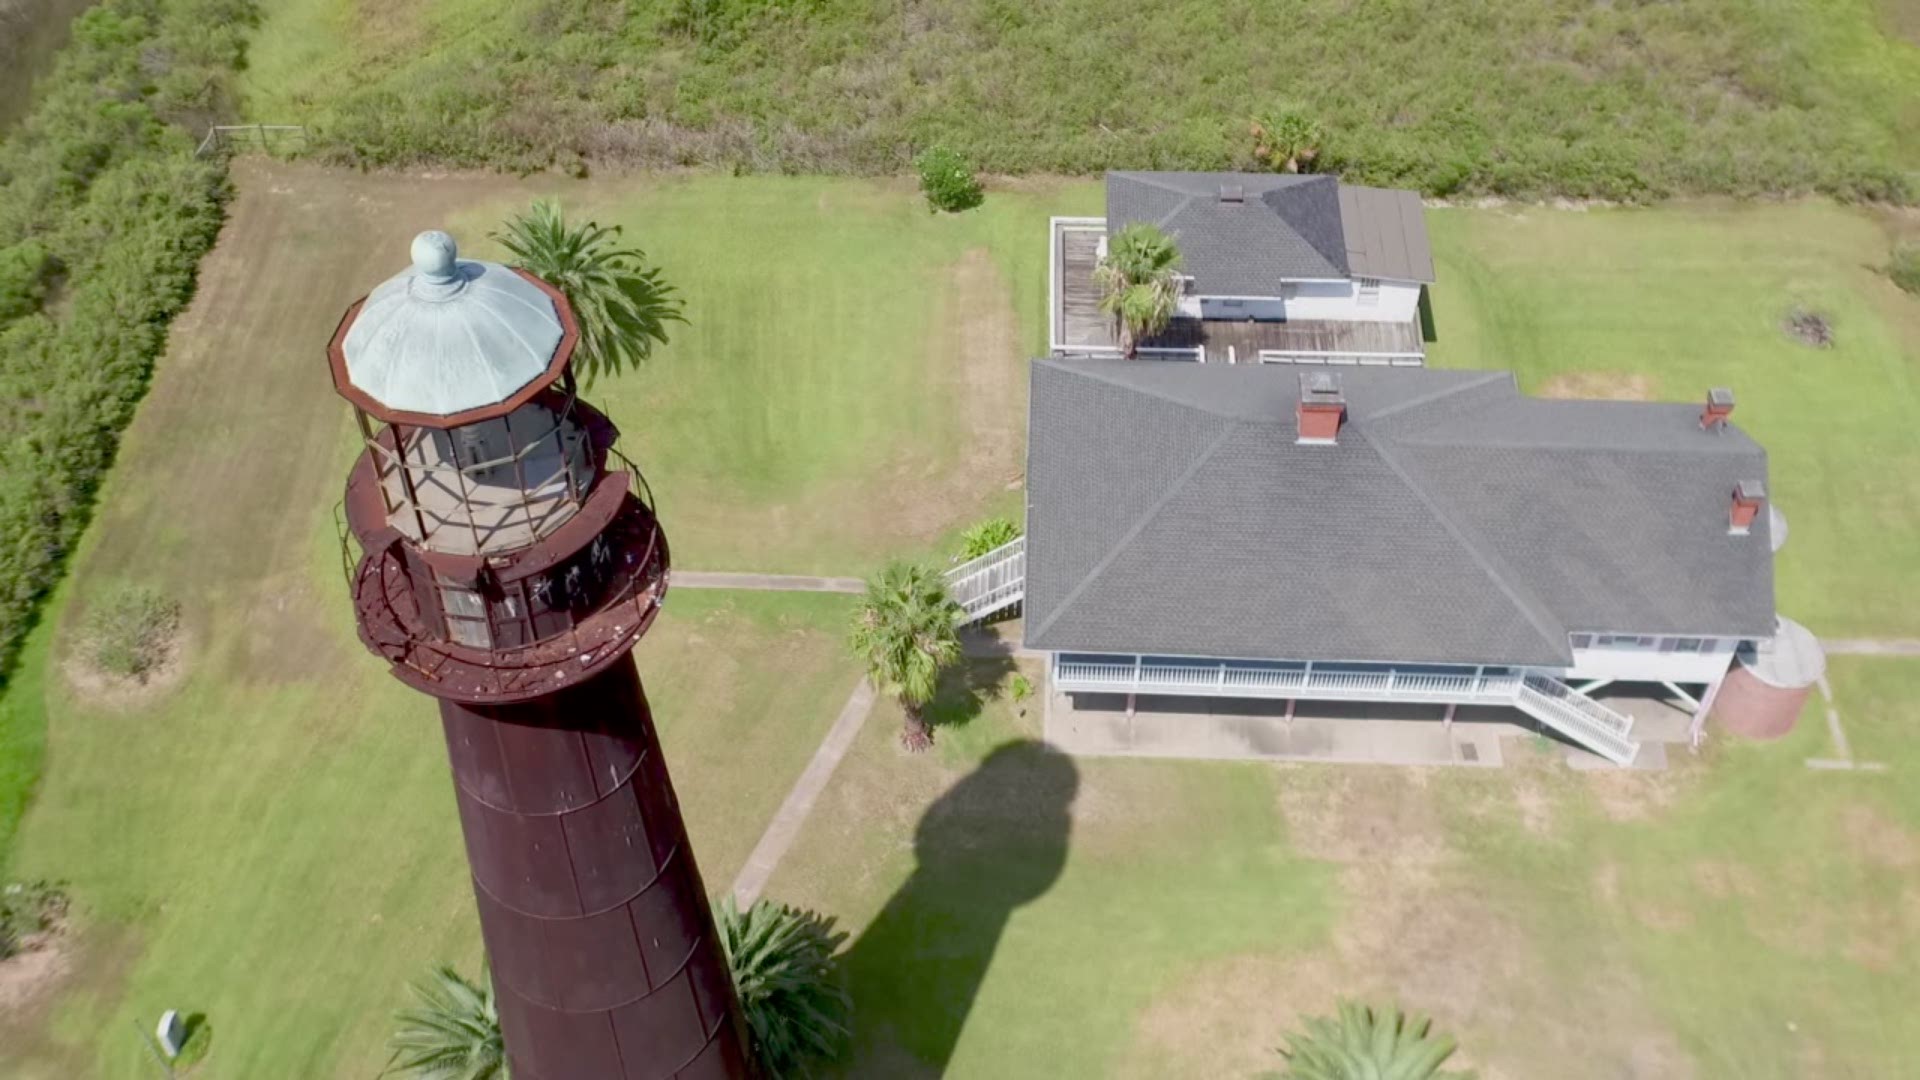 The Bolivar Lighthouse, built in 1872 by the federal government, stands at about 117 feet tall near the western tip of the Bolivar Peninsula. The lighthouse, which is registered as a historical landmark by the Texas Historical Commission, is made of brick and covered in cast-iron plates which are riveted together.